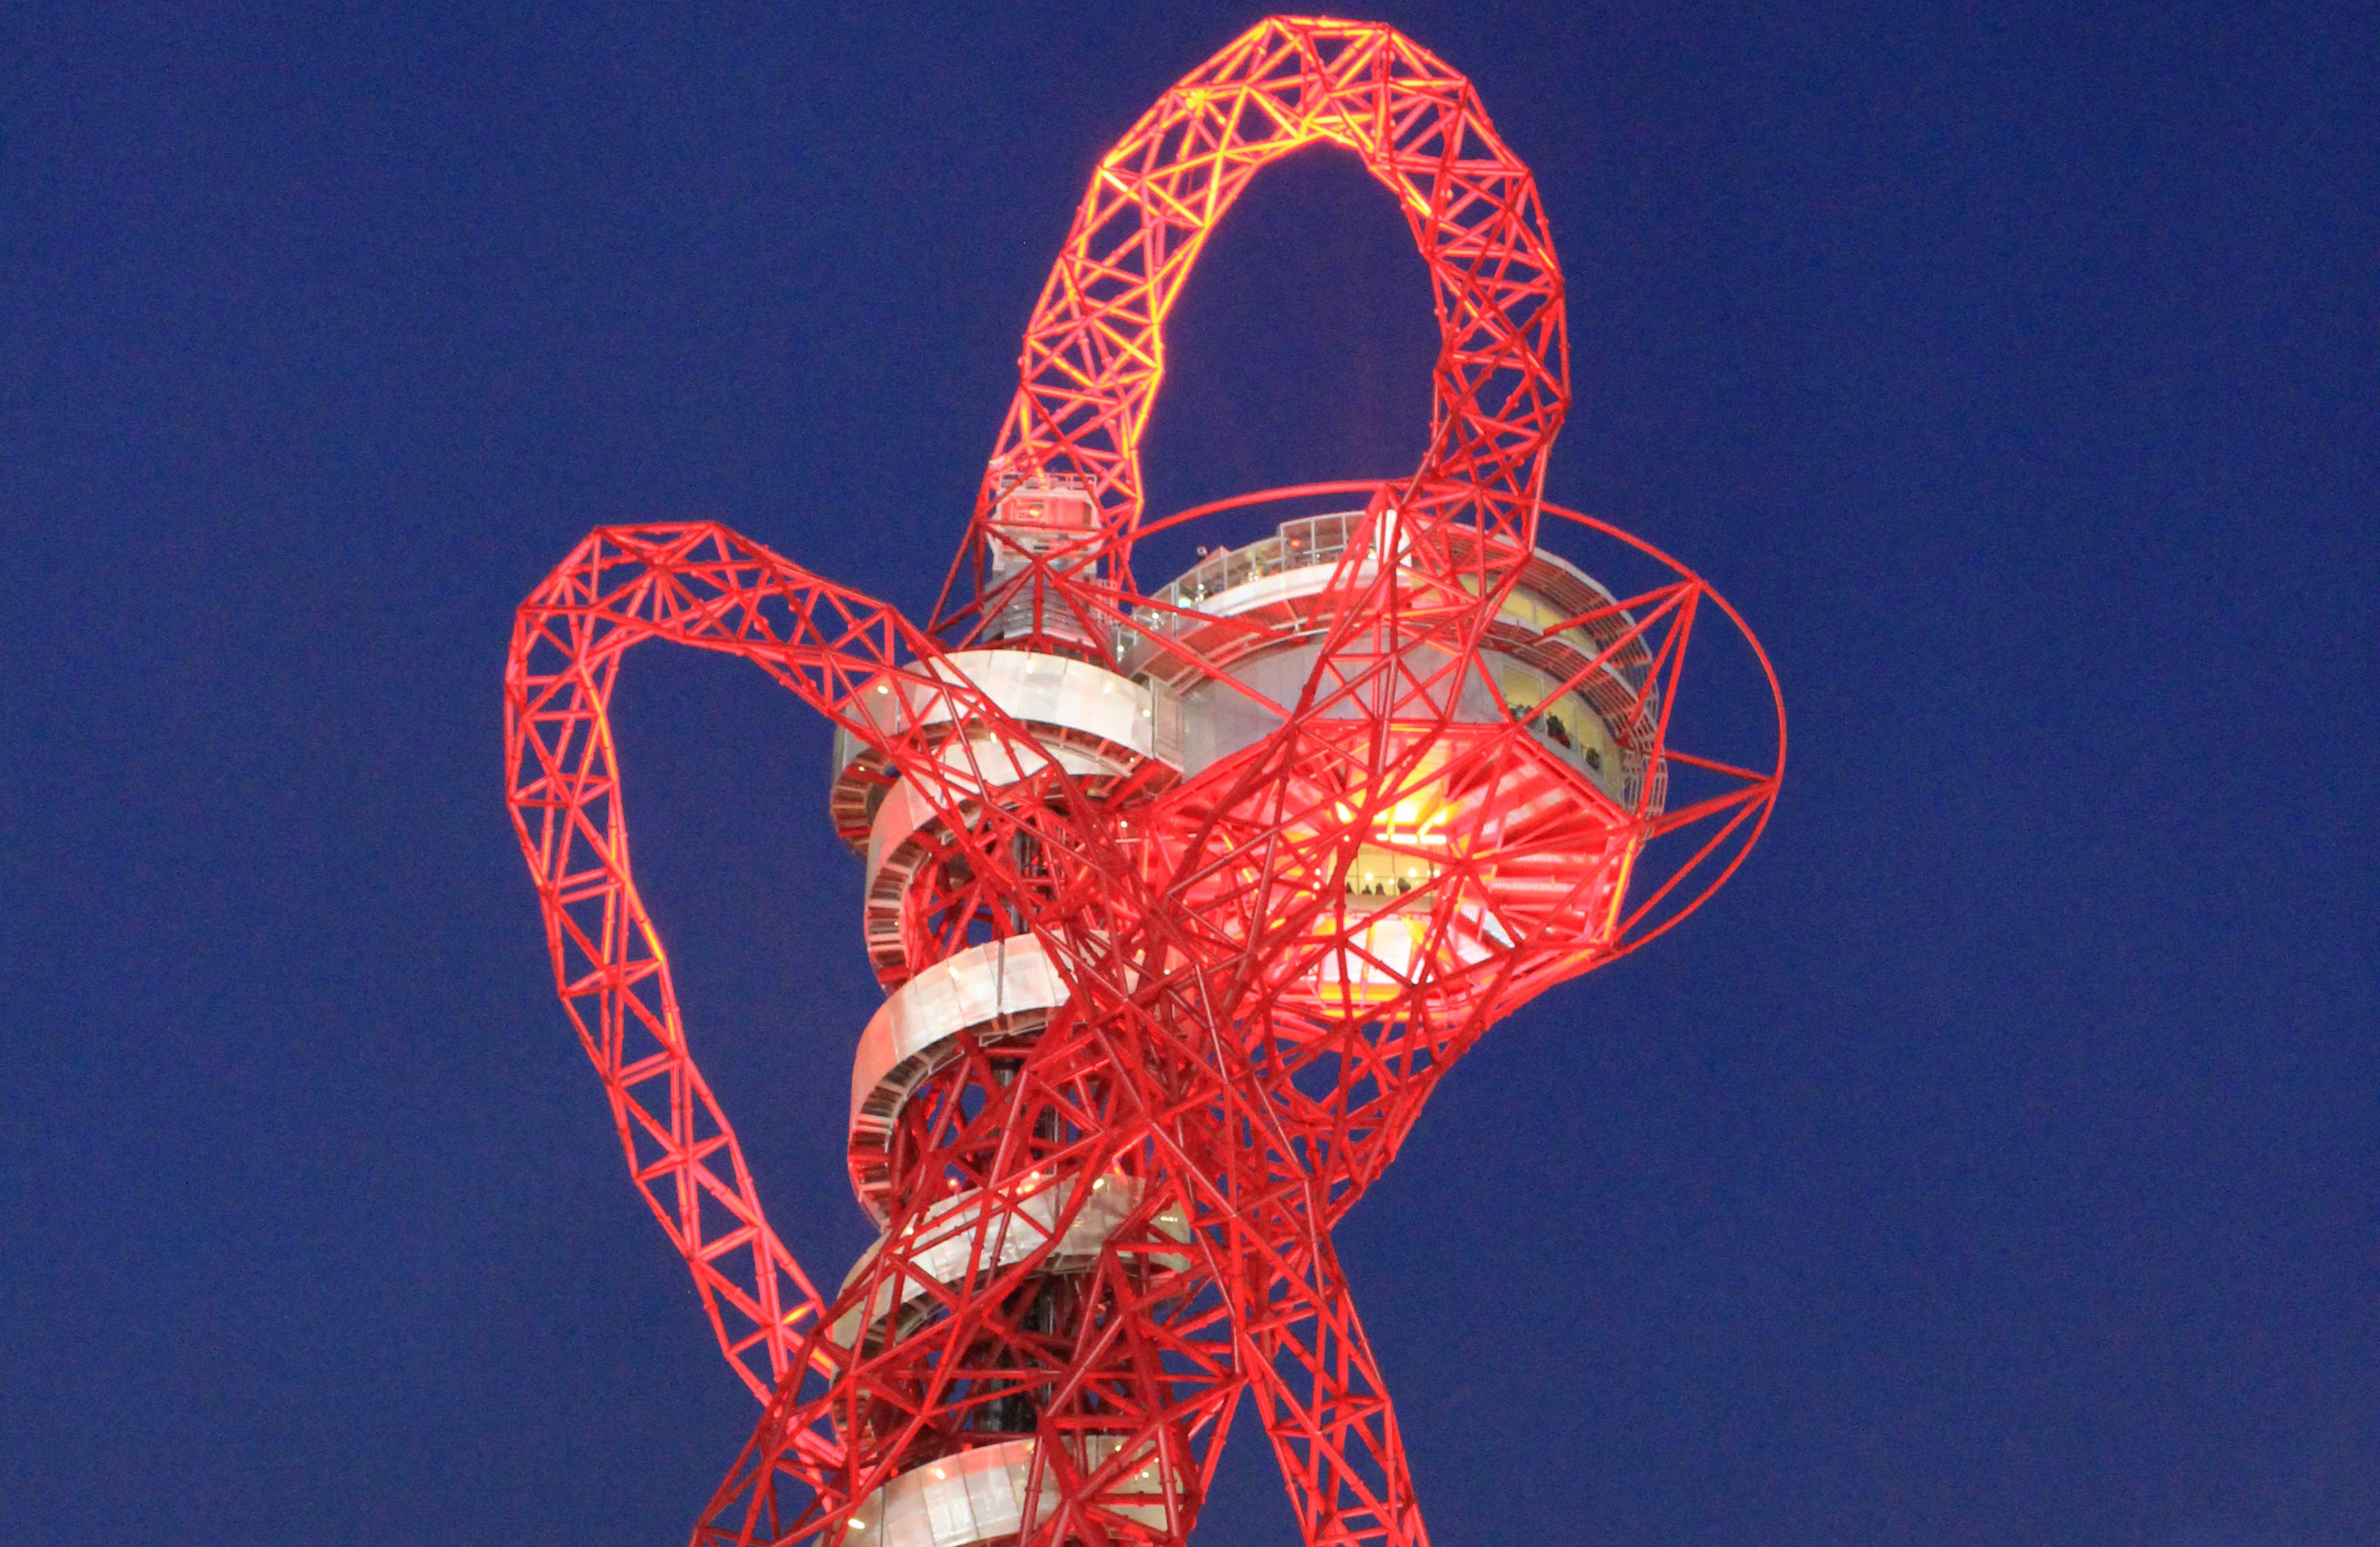 New immersive theatre dining experience to open at ArcelorMittal Orbit in  London